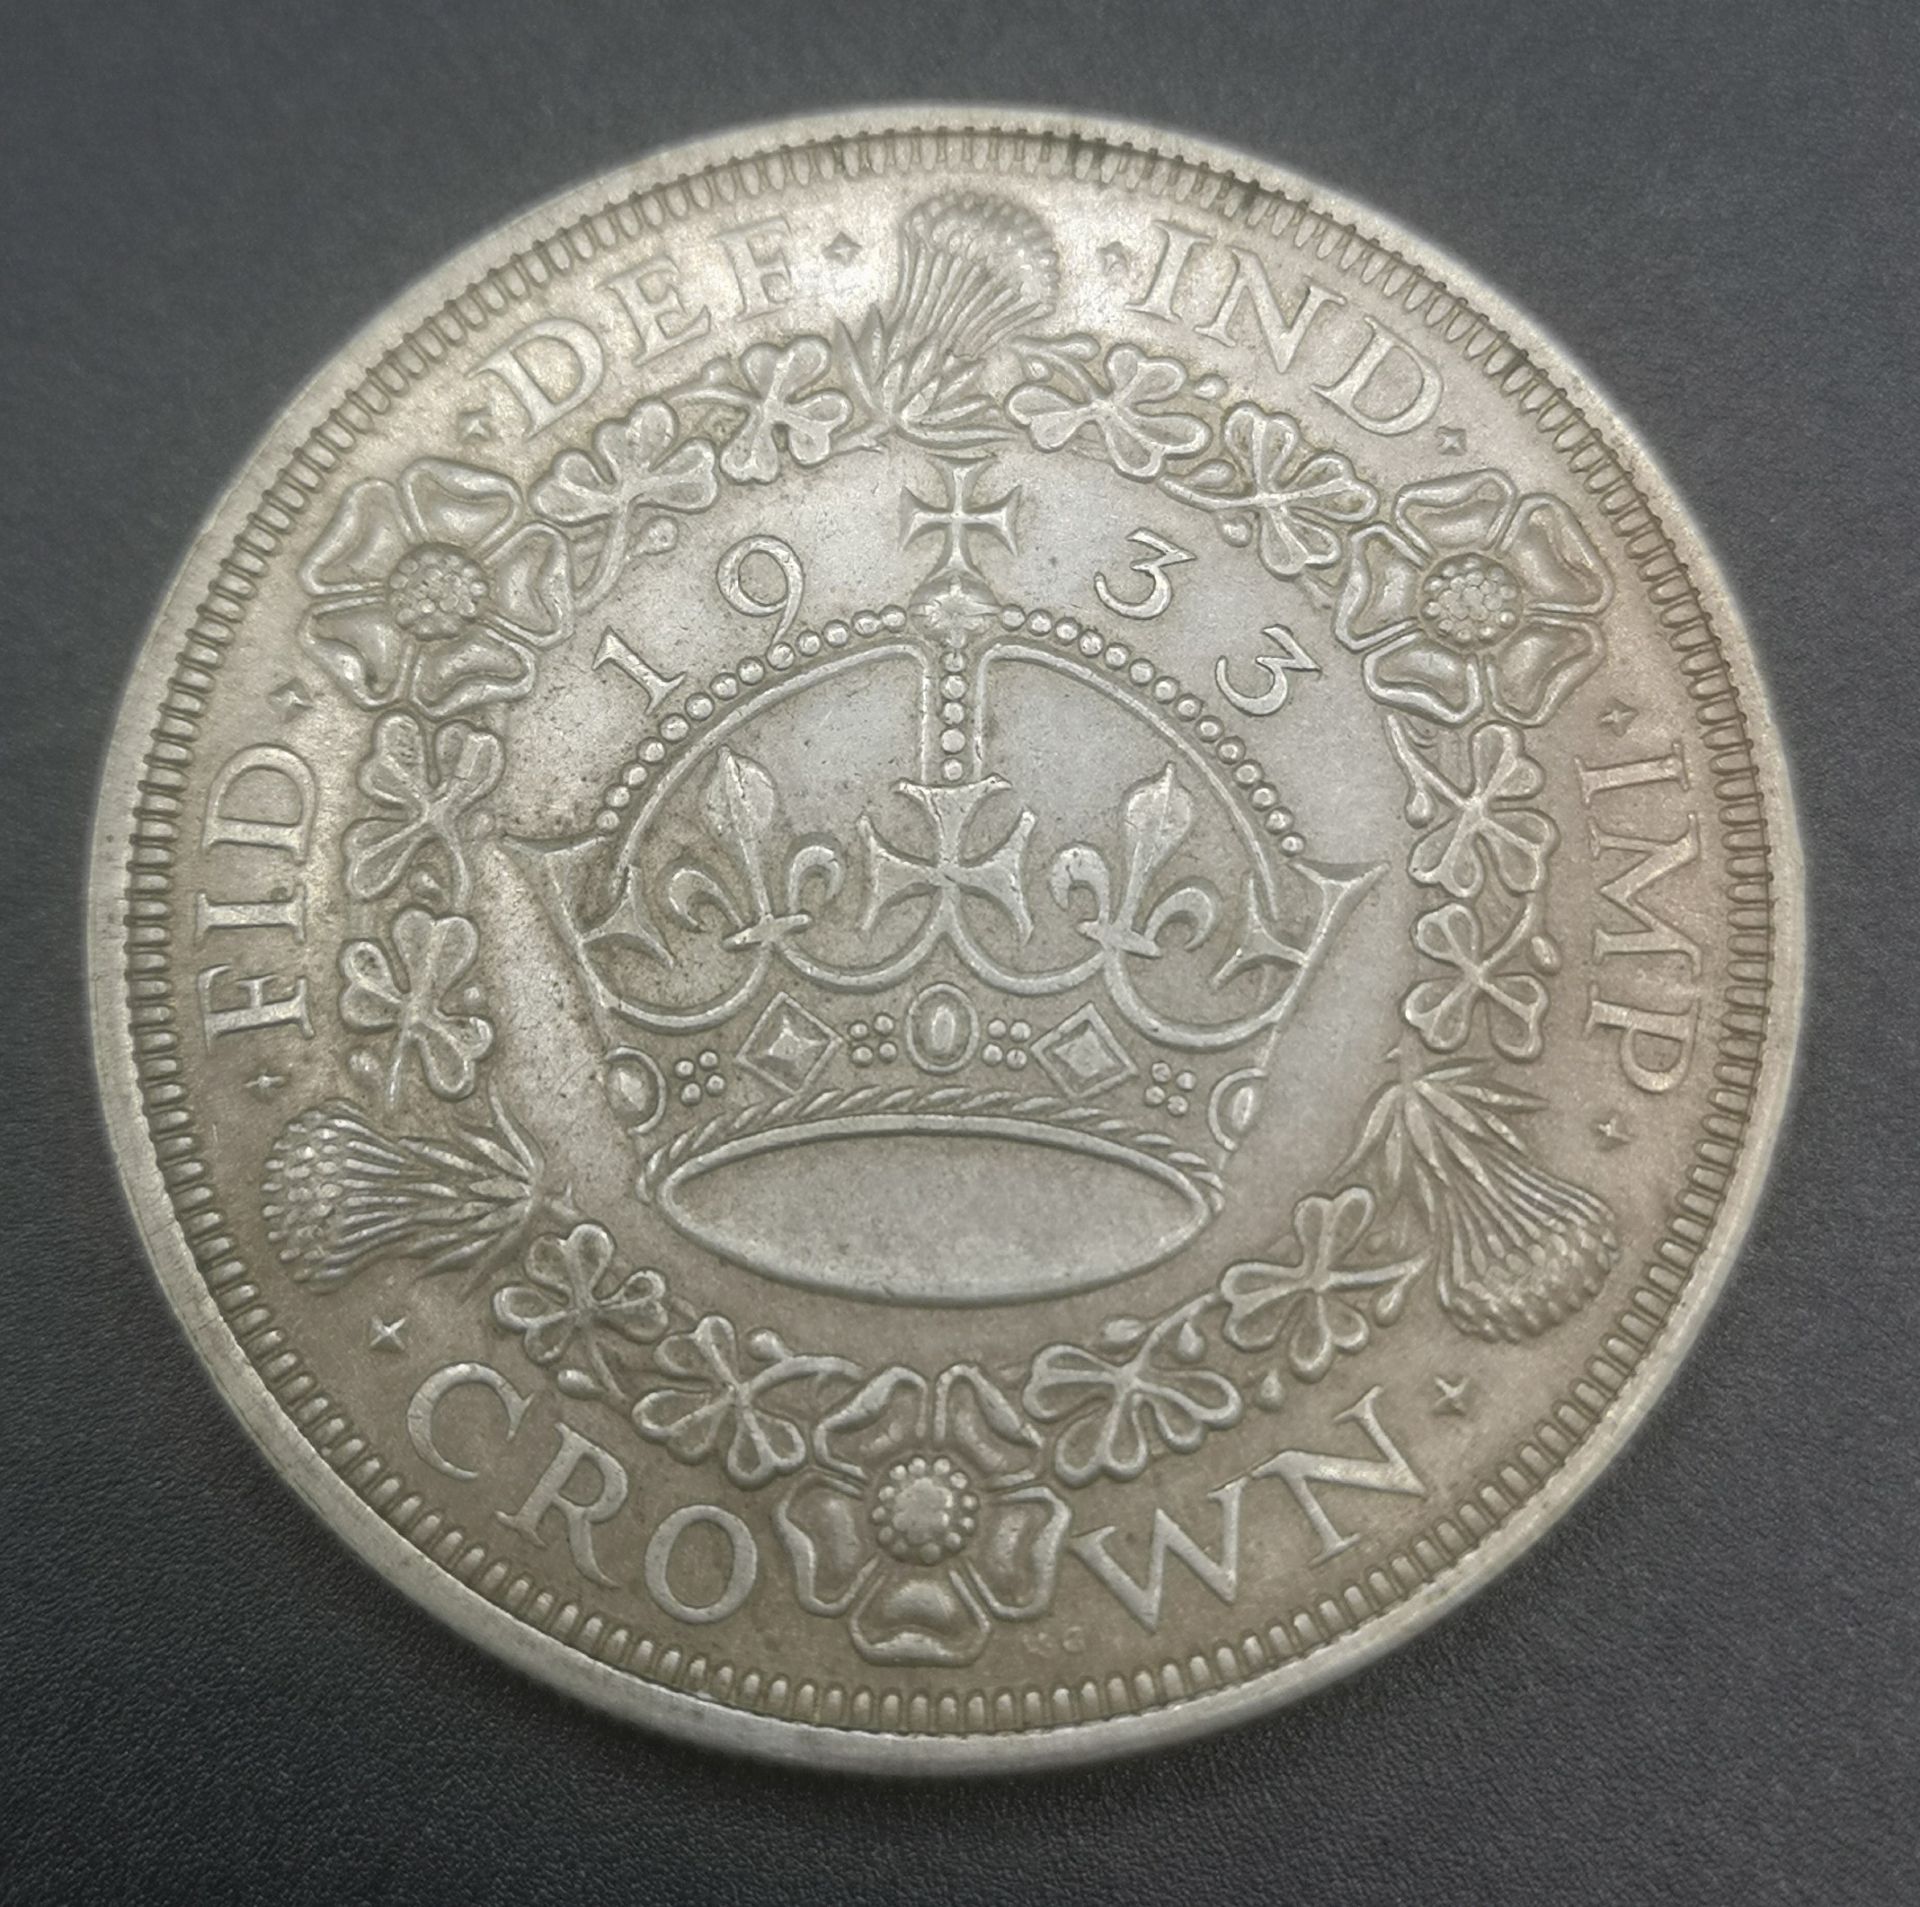 King George V 1933 wreath crown coin - Image 4 of 4